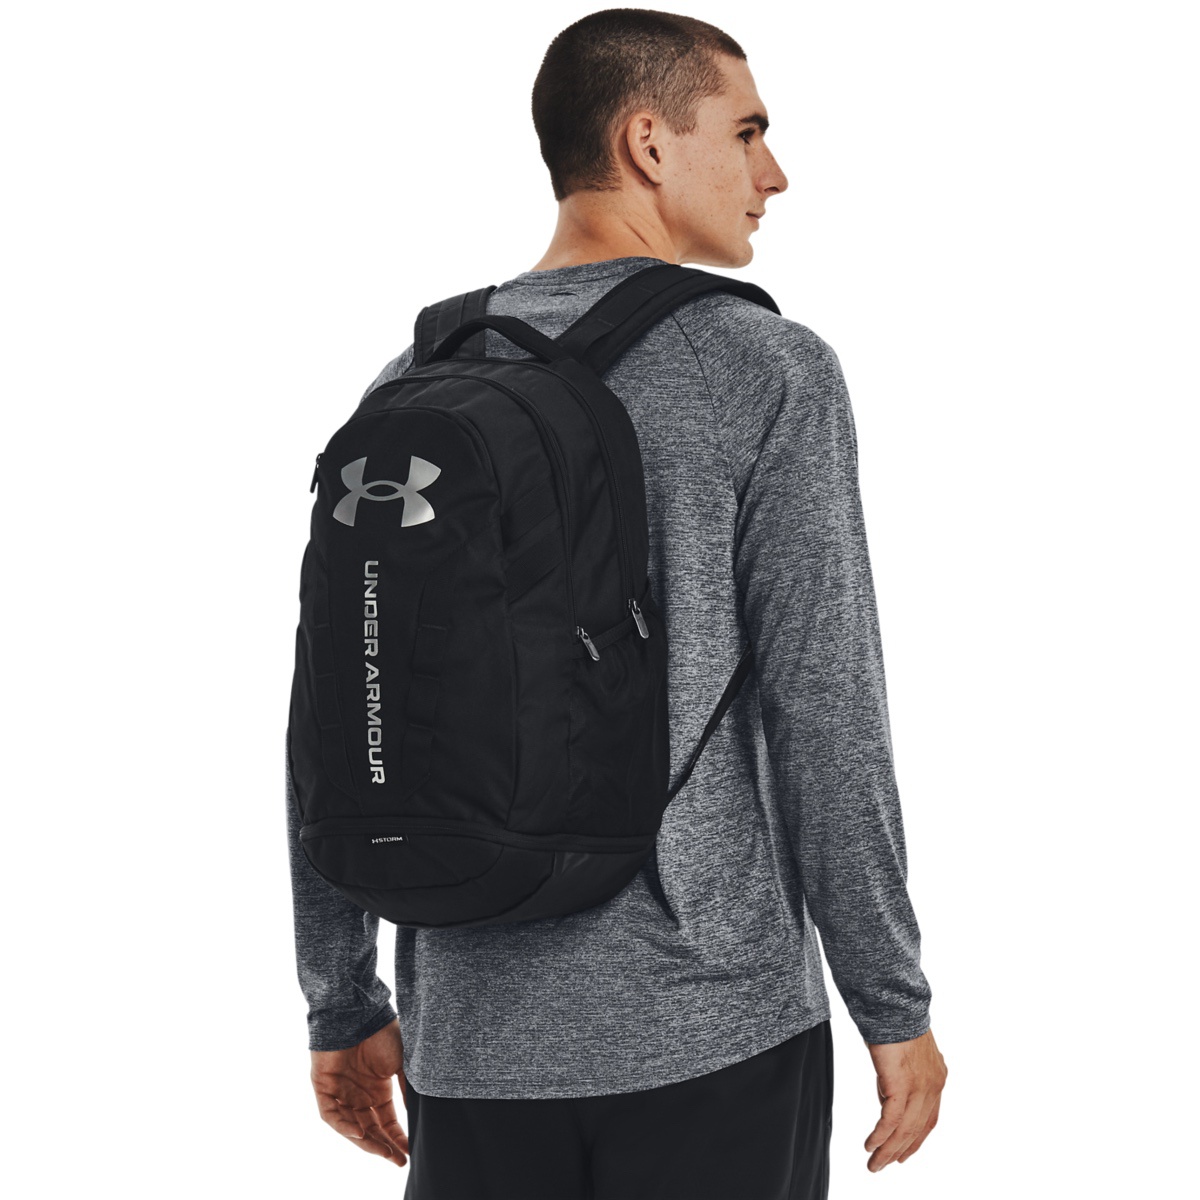 Rucsac Unisex HUSTLE 5.0 BACKPACK Under Armour